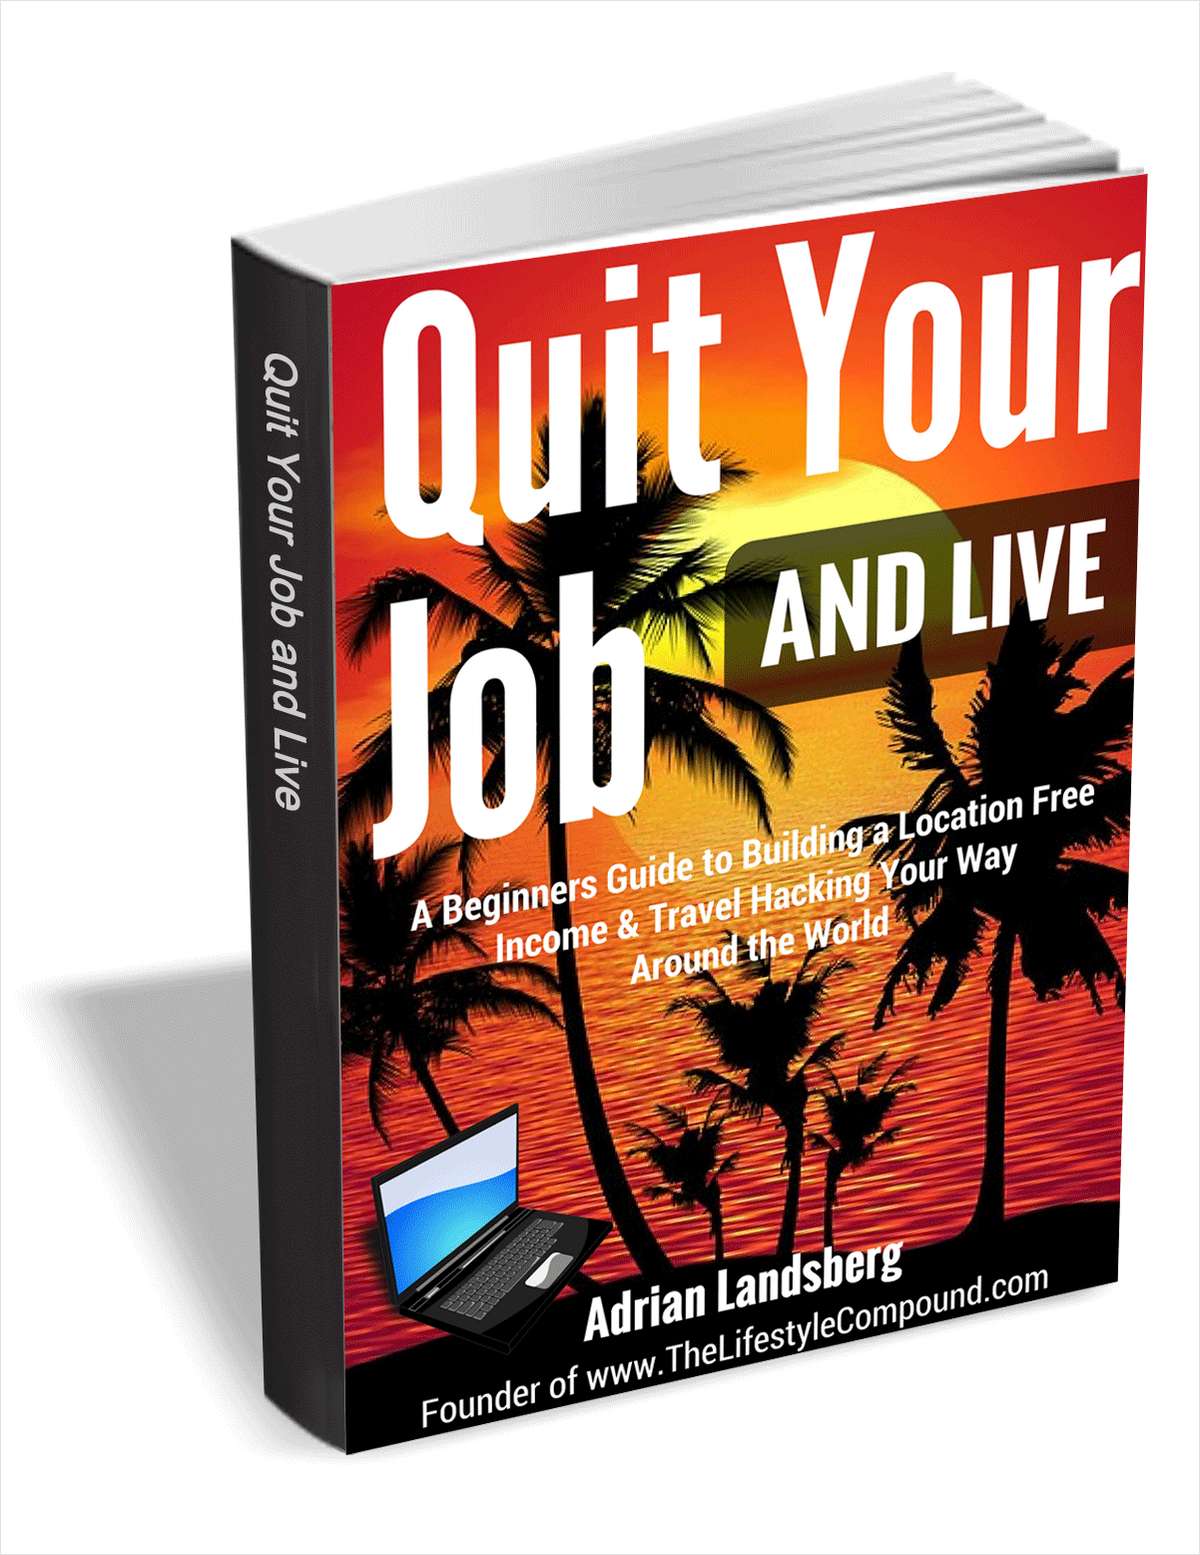 Quit Your Job and Live - a Beginners Guide to Building a Location Free Income & Travel Hacking Your Way Around the World